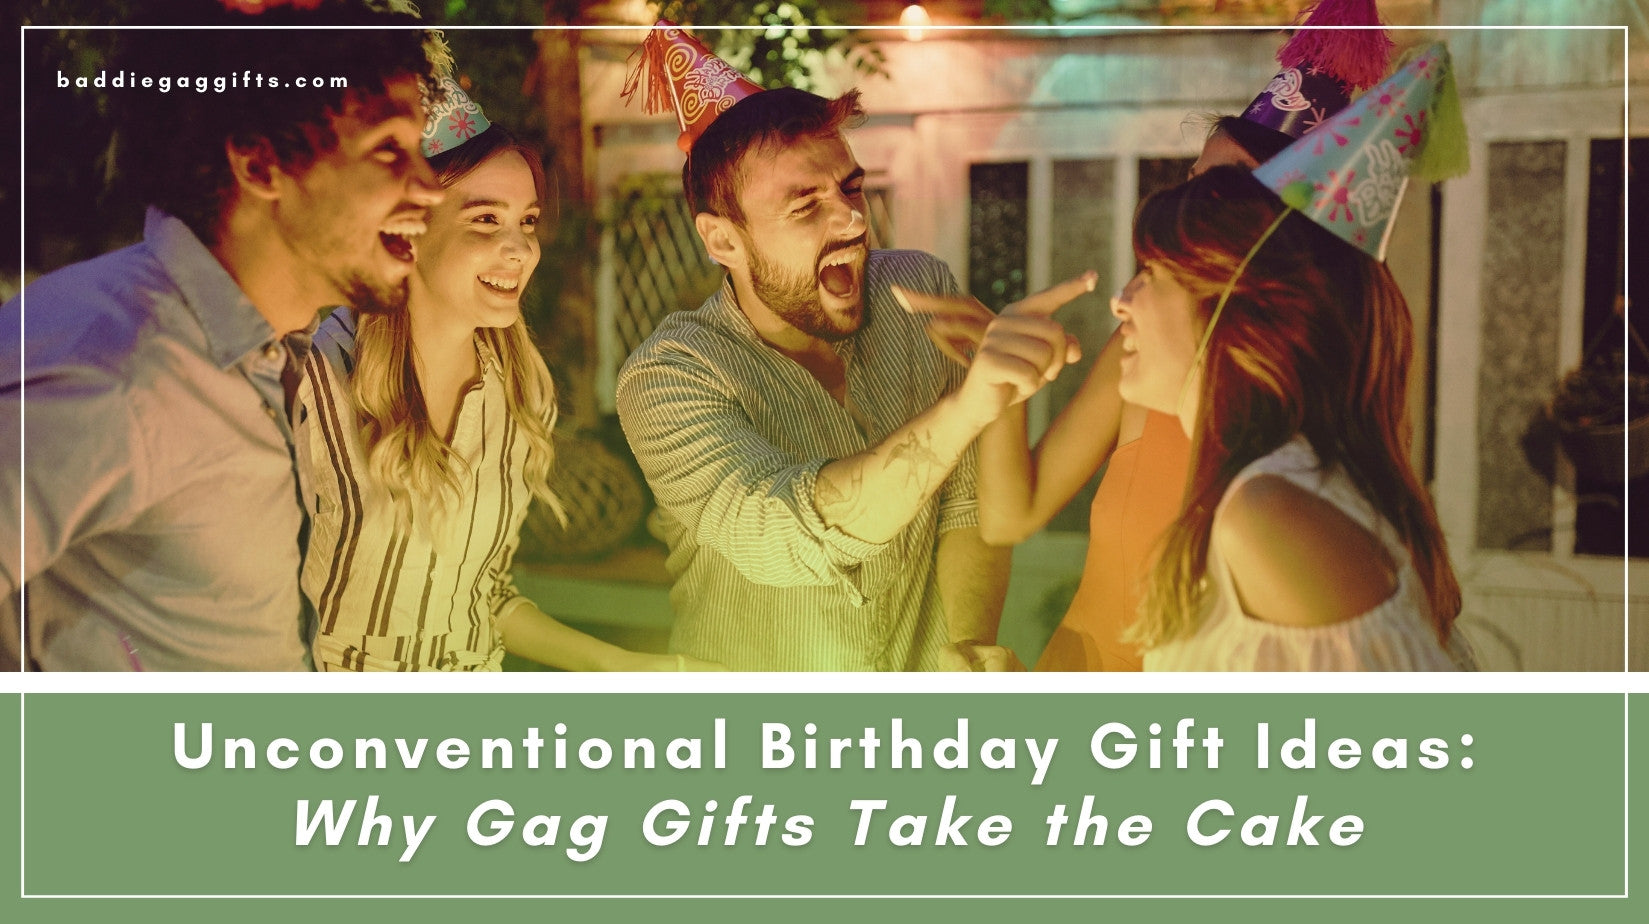 10 Fantastic Birthday Gifts For Couples to Express Love